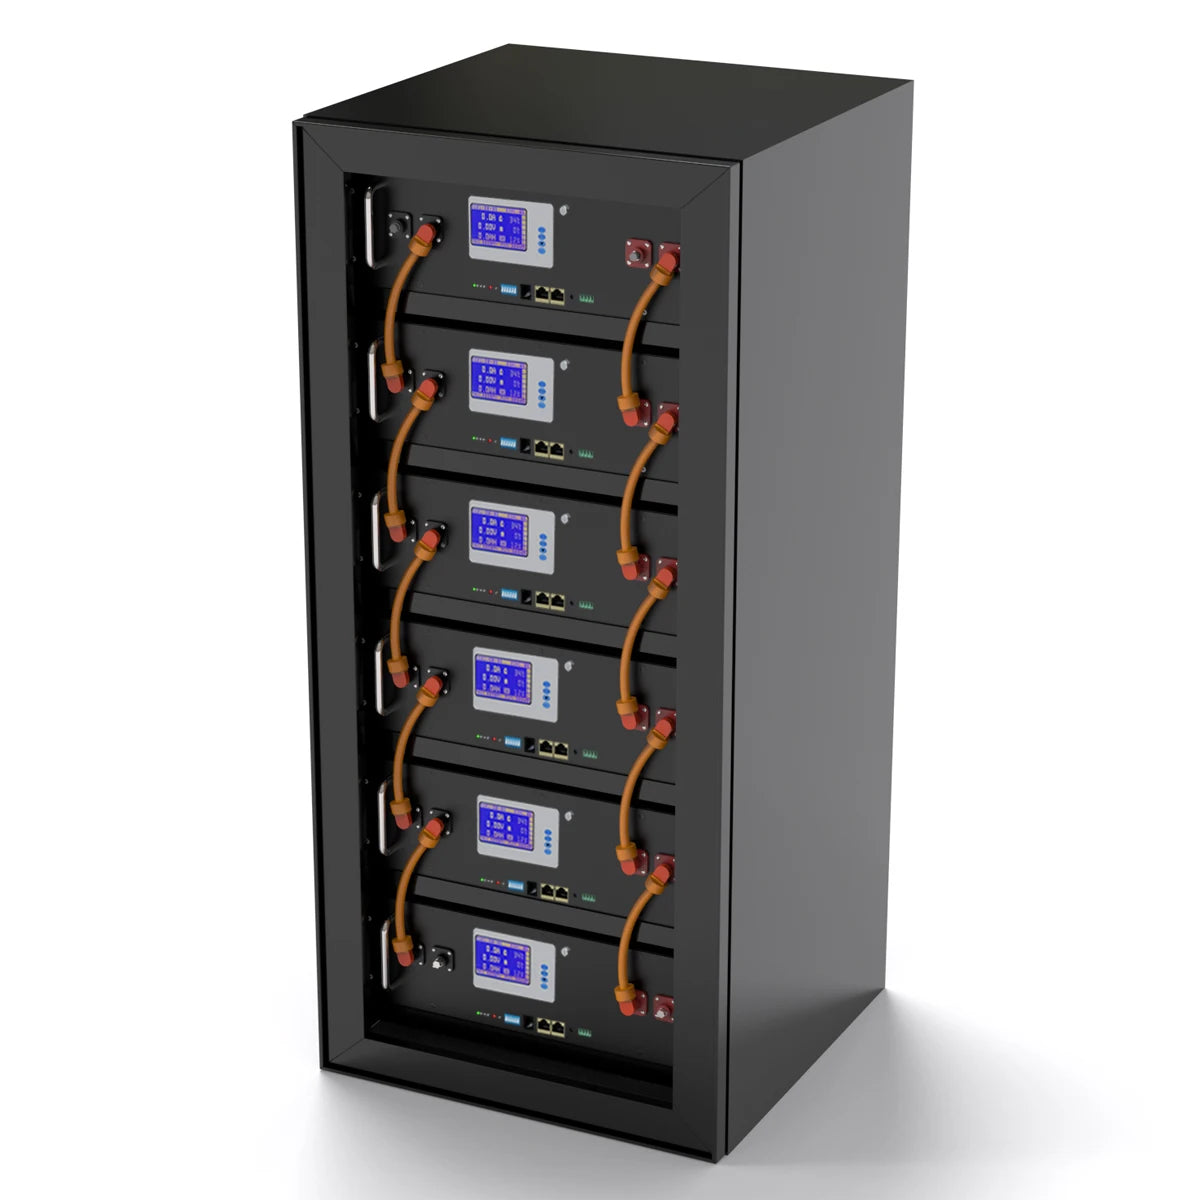 48V 200AH 10KW LiFePO4 Battery, Display shows voltage, capacity, current, and individual cell voltages for easy monitoring.